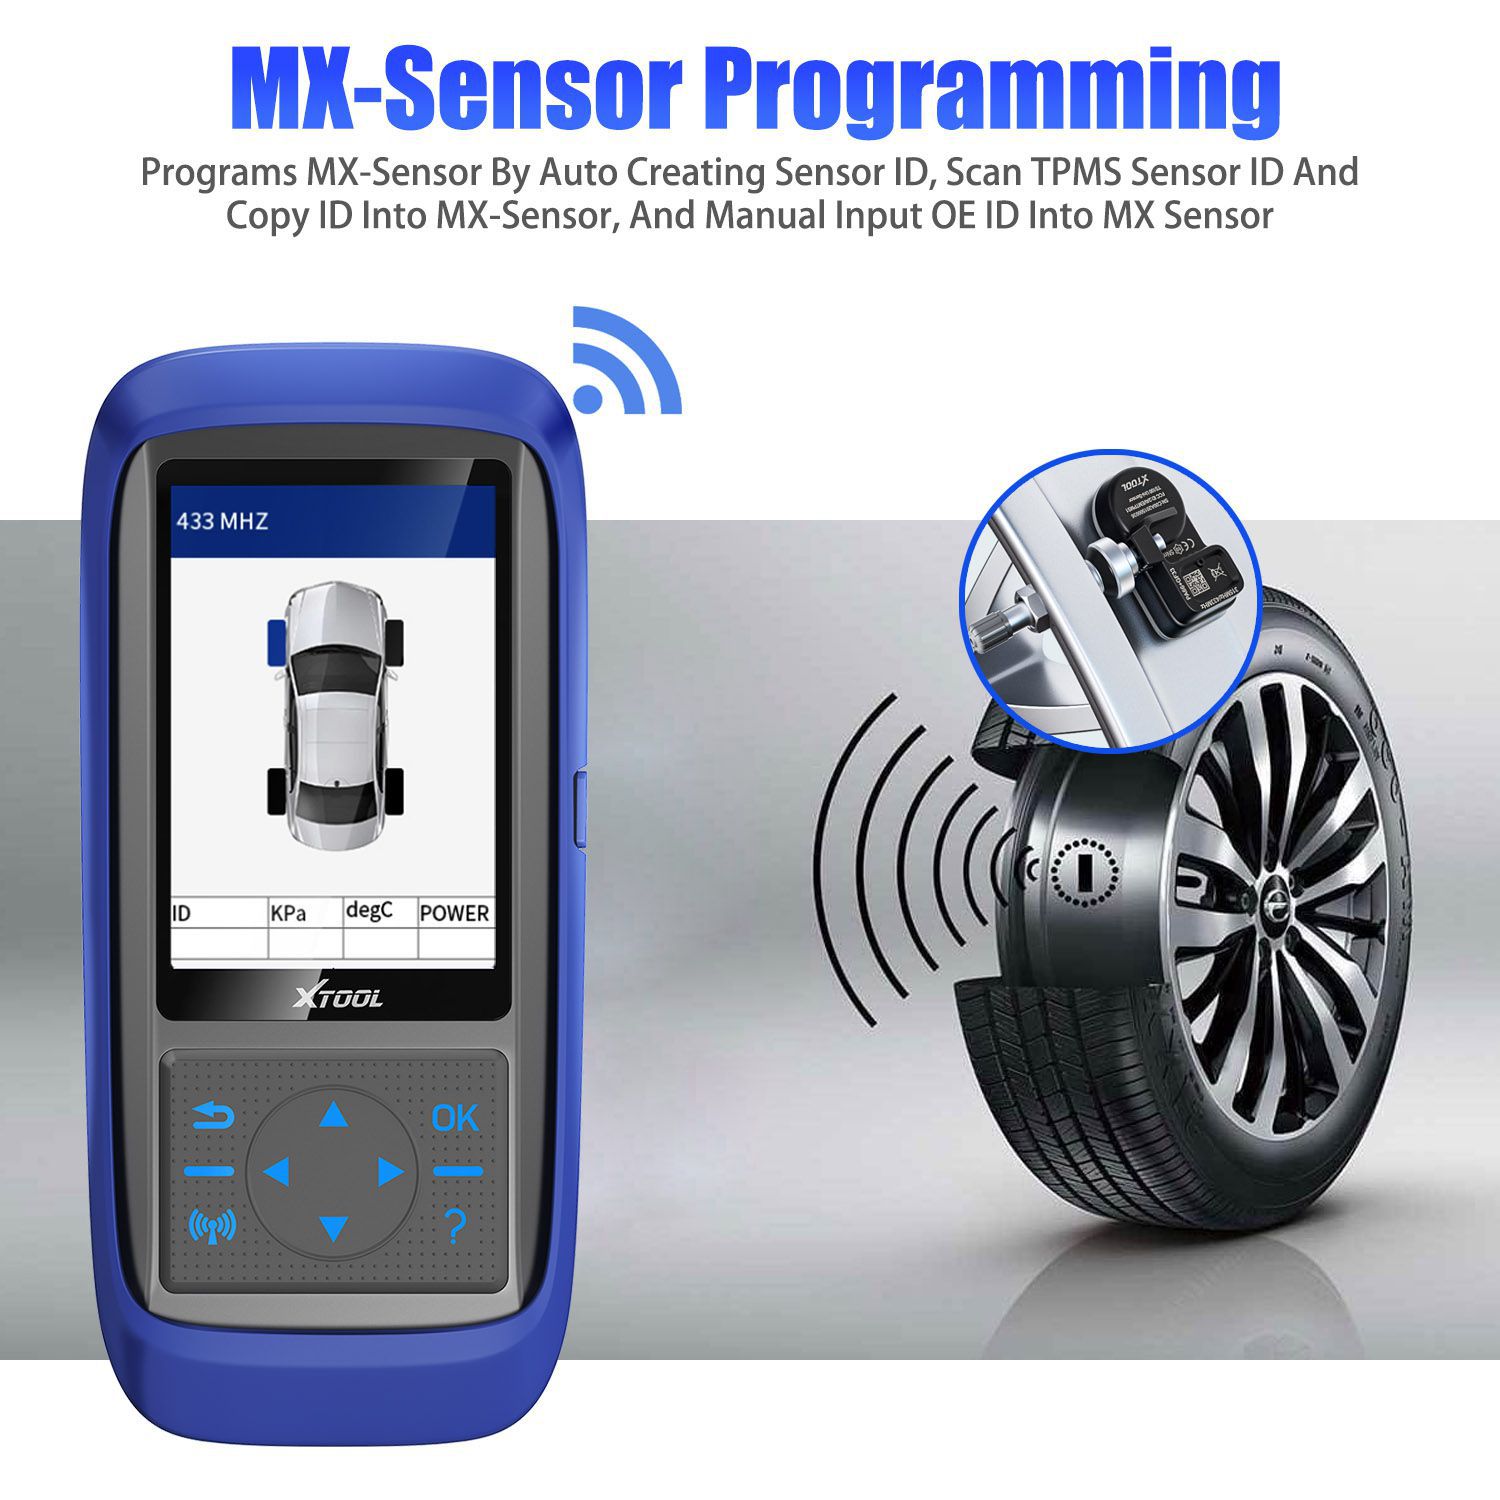 Xtool tp150 Tyre Pressure Monitoring System OBD2 TPMS scanner tool with 315 and 433 MHz Sensors